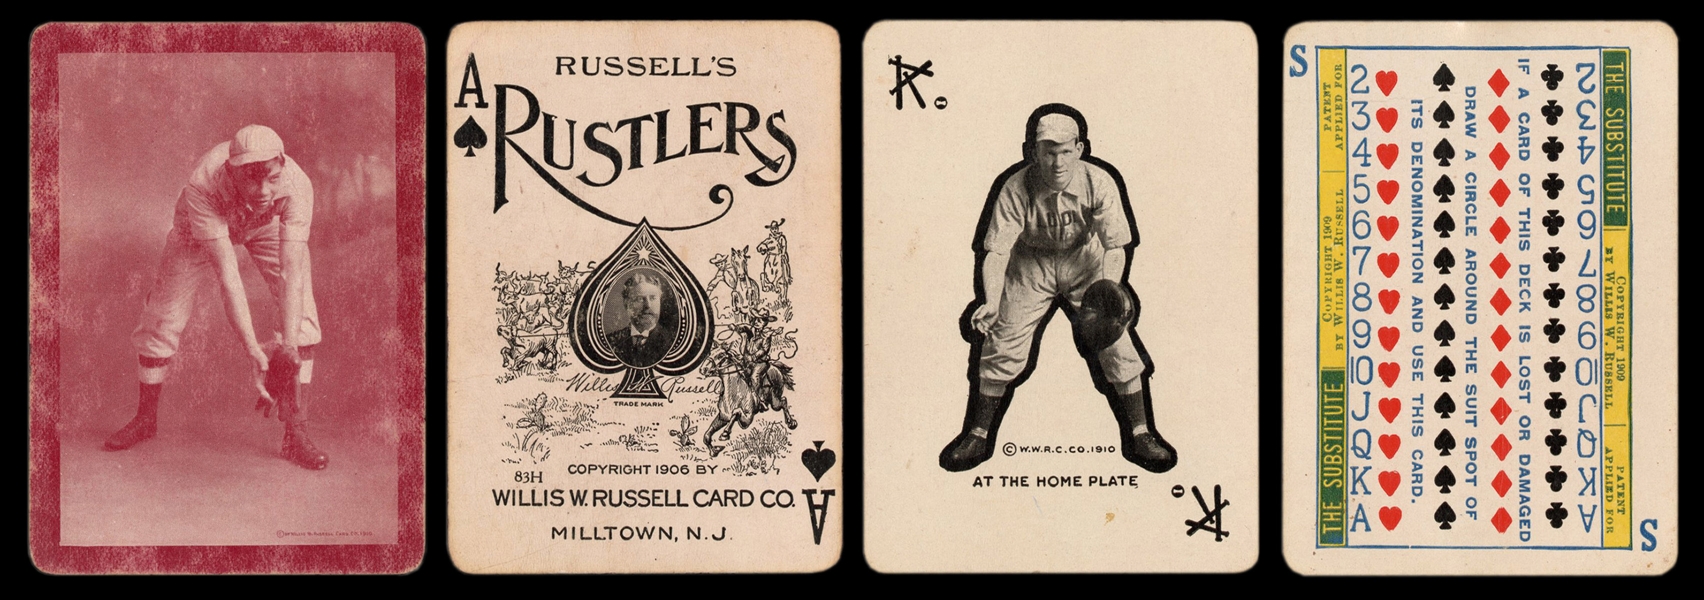  Russell’s Rustlers Baseball-Theme Playing Cards. Milltown, ...